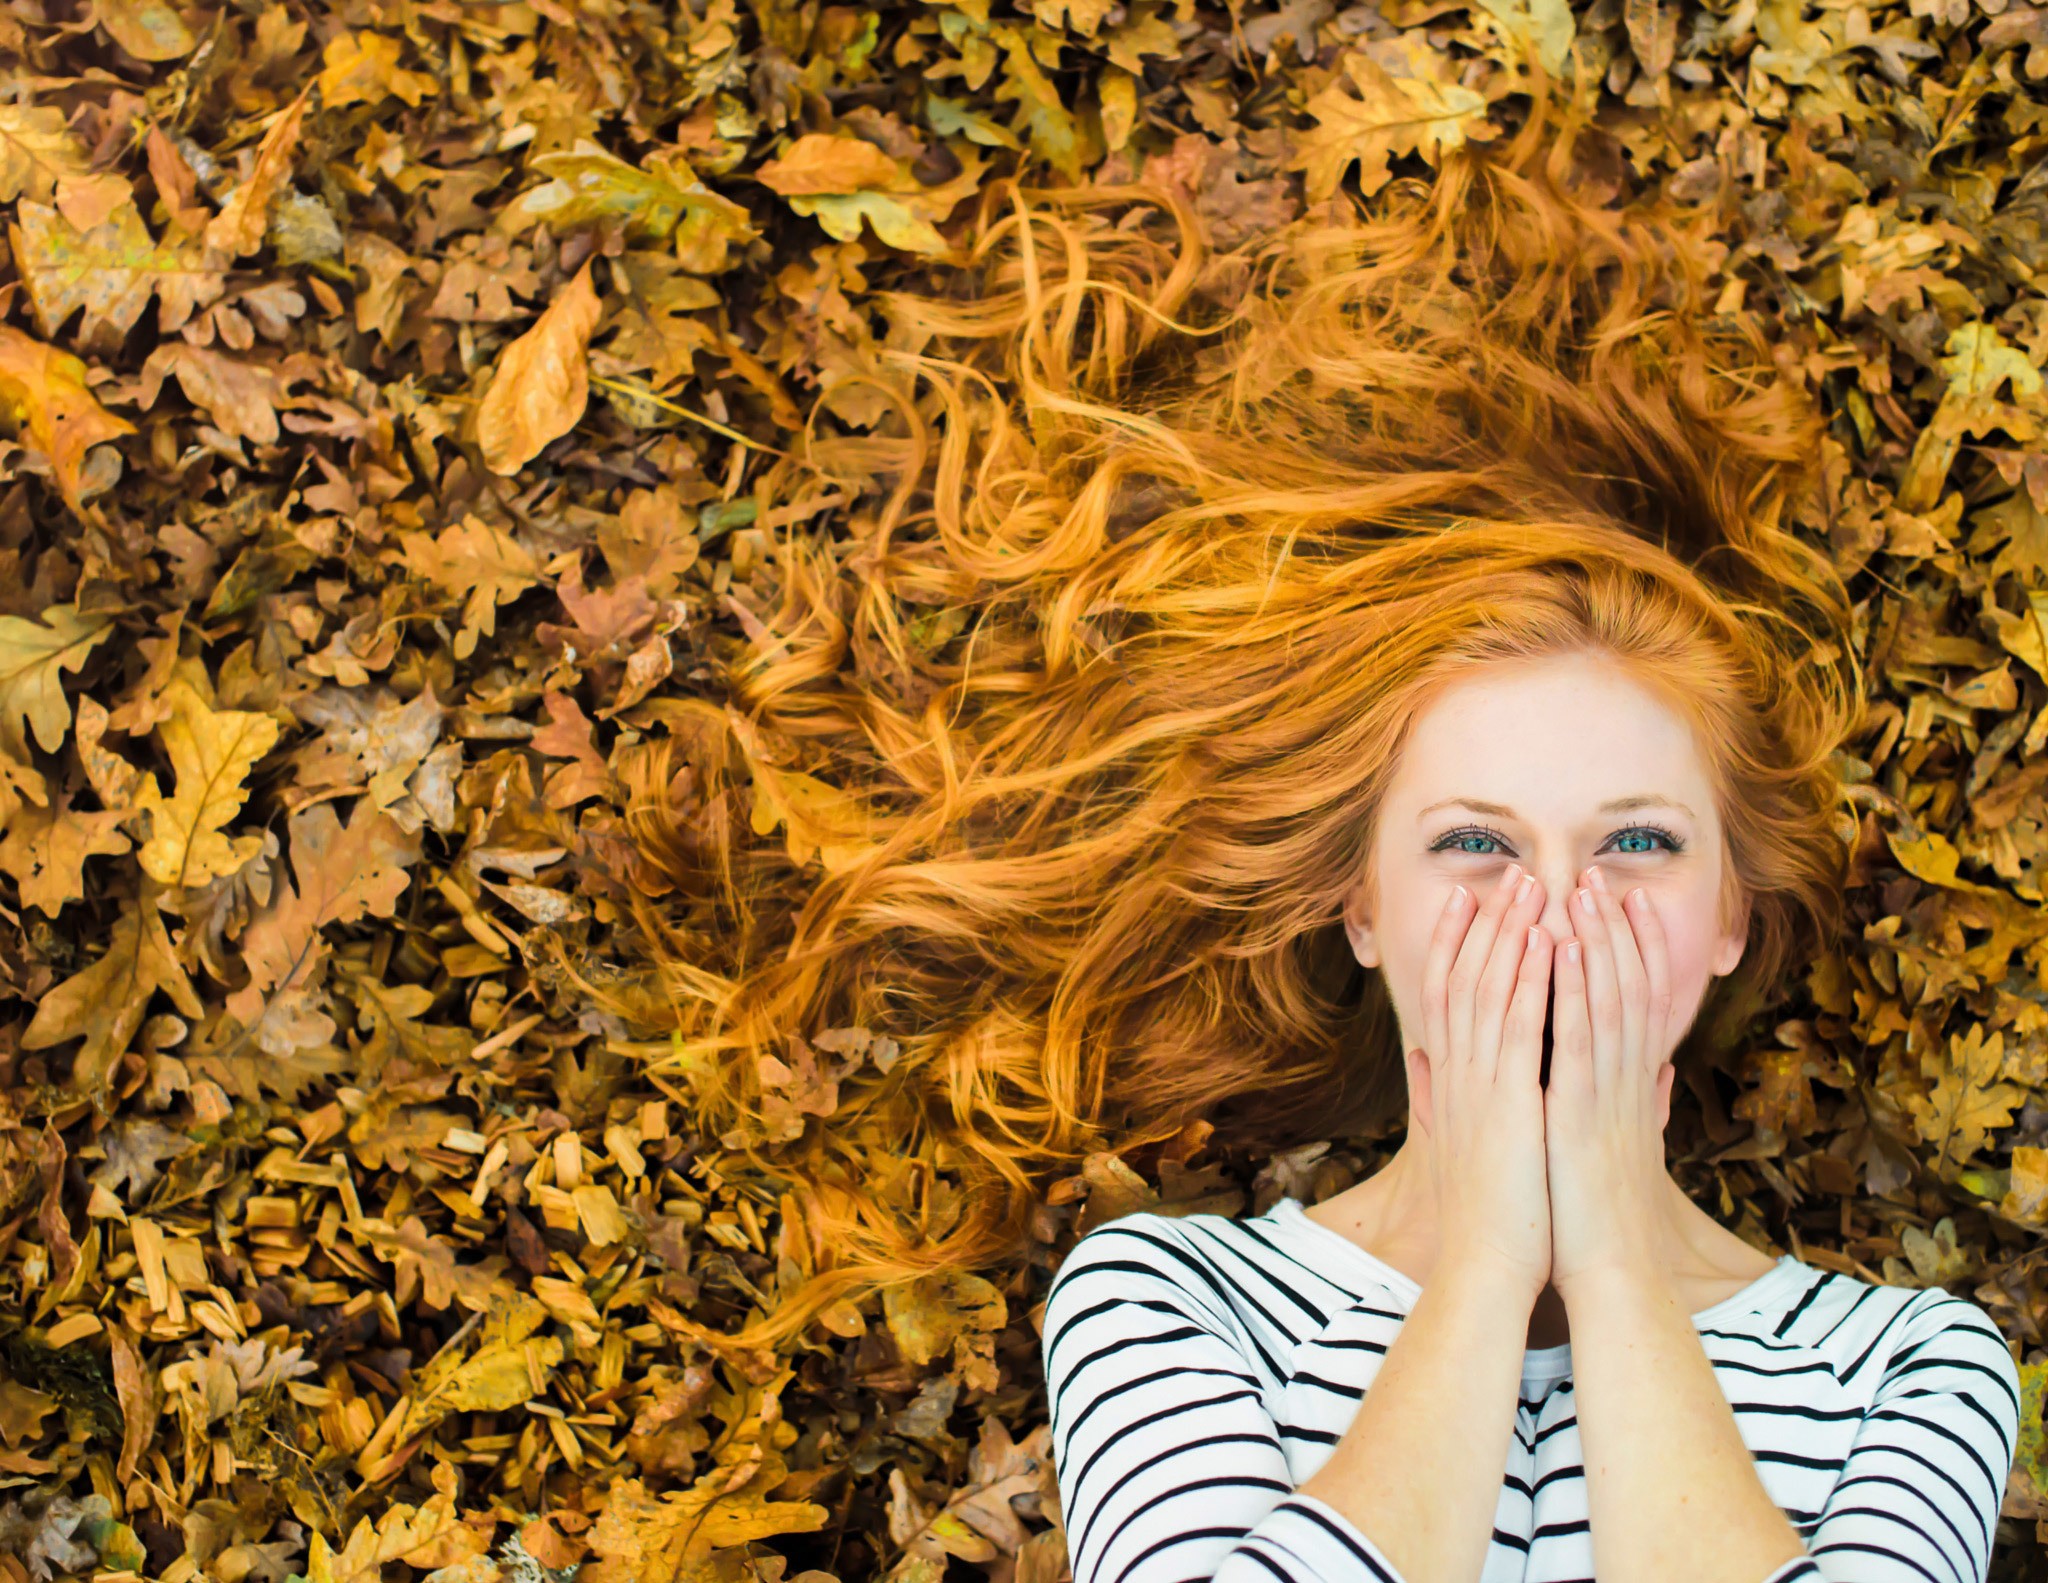 People 2048x1583 leaves women laughing model striped redhead happy fallen leaves blue eyes fall women outdoors striped clothing long hair face hand on face